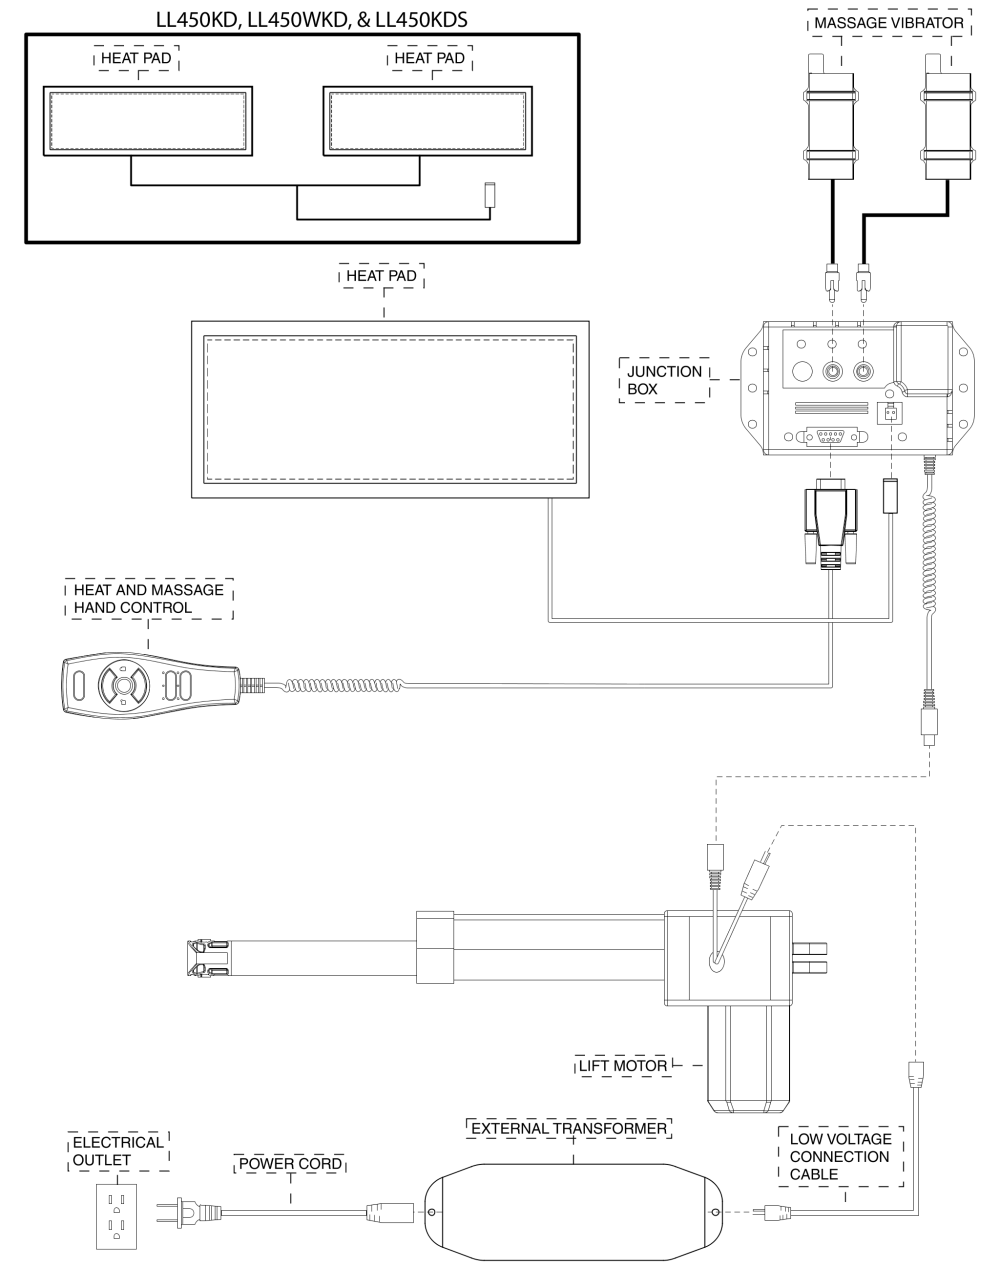 Electrical Diagram, Heat And Massage, Us parts diagram